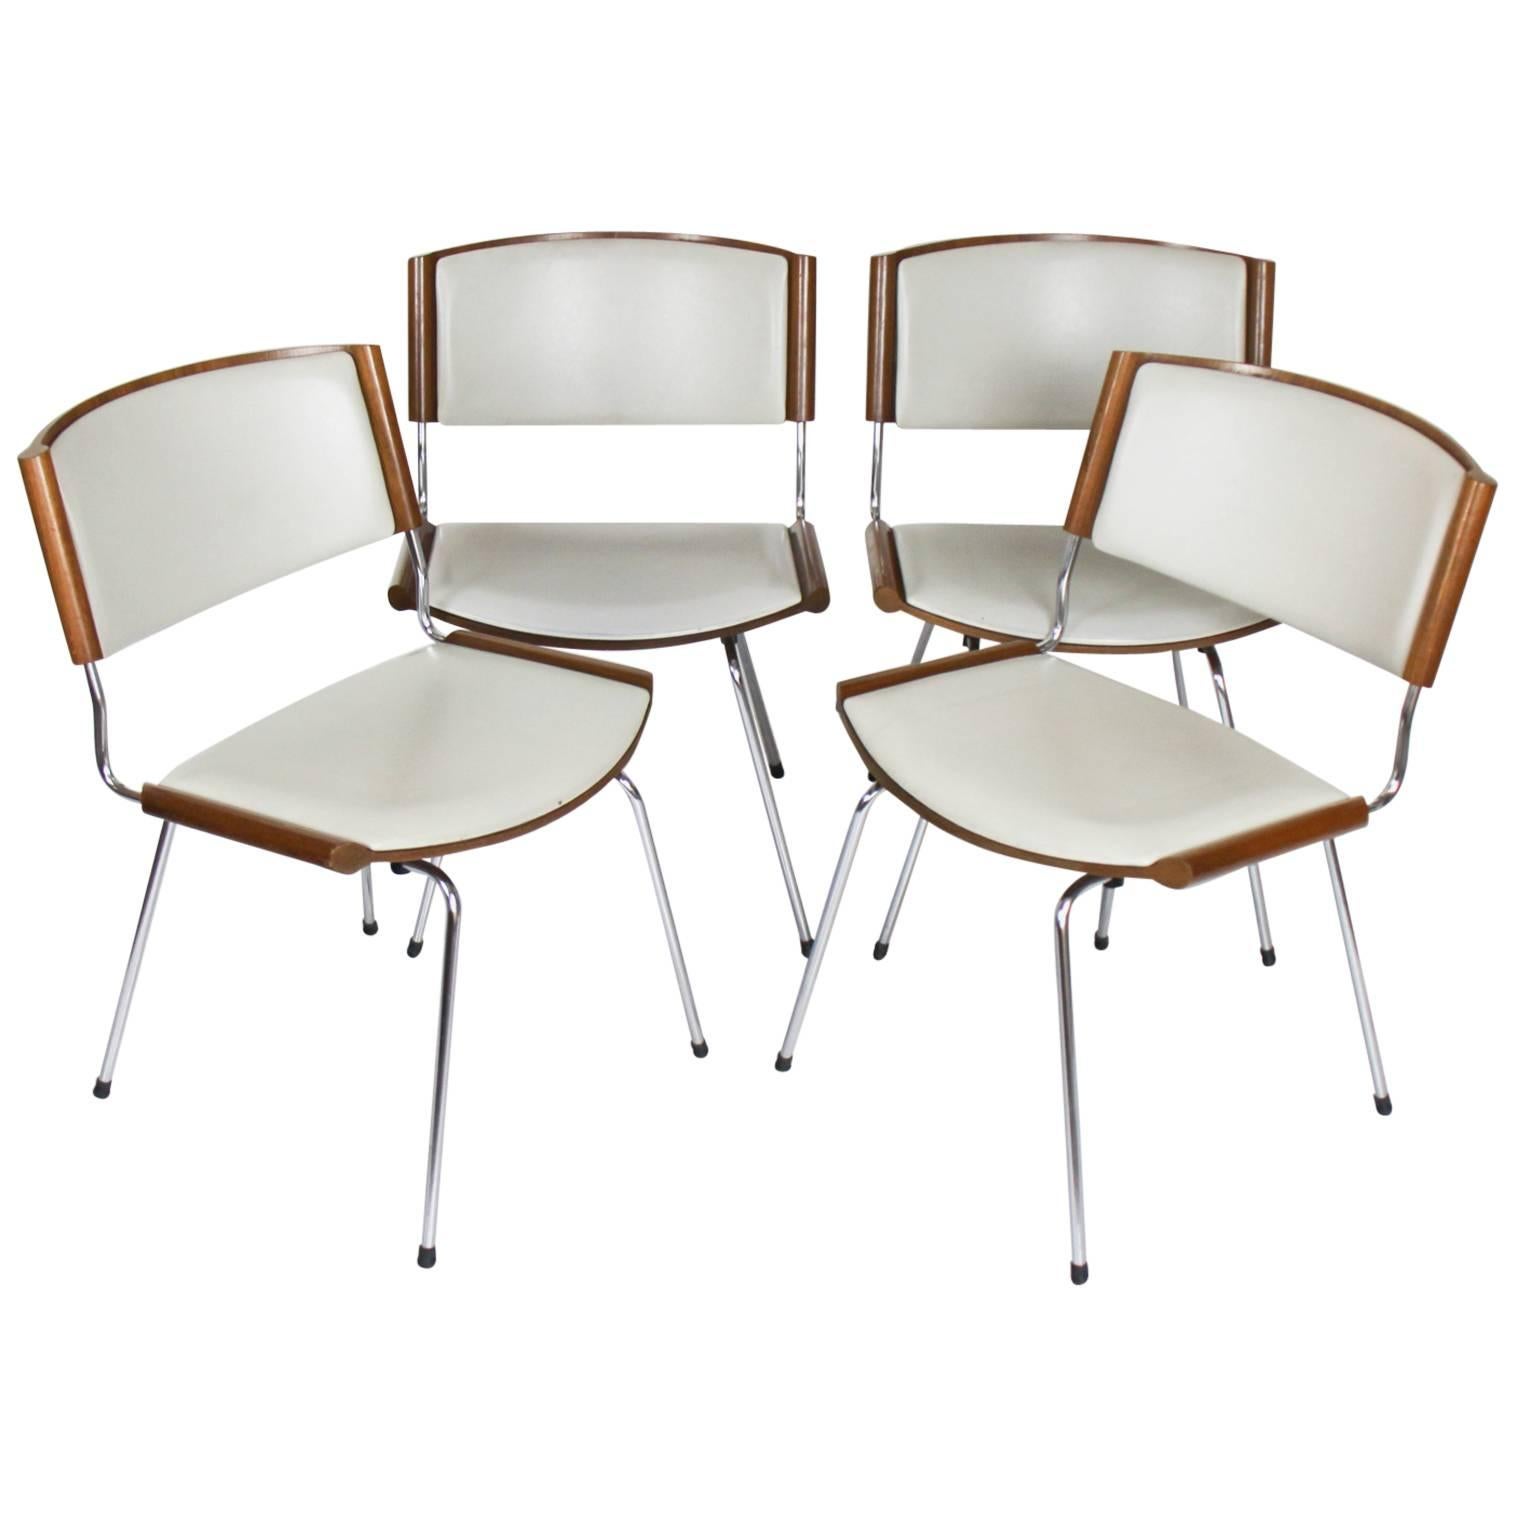 Set of Four M150 Dining Chairs by Nanna Ditzel for Kolds Savvaerk, Denmark, 1958 For Sale